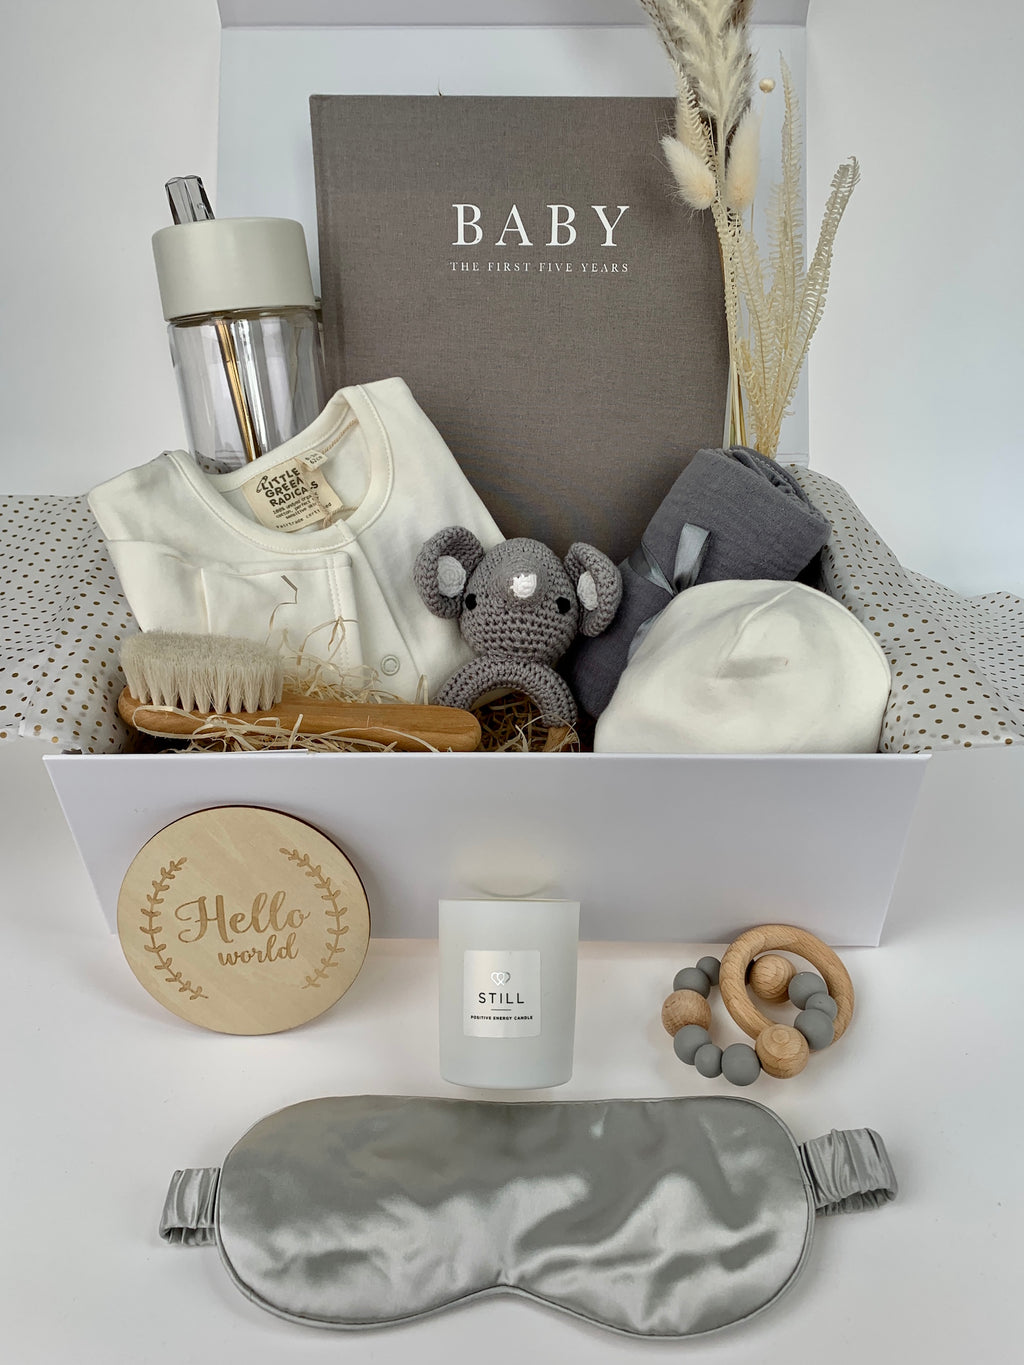 Ultimate mama baby gift set containing Baby record journal book in grey, white long sleeve baby grow and hat by Little Green Radicals, grey elephant crochet rattle, 100% cotton grey muslin, wooden soft bristle brush, Hello World wooden announcement disc, wood and silicon grey teether, 100% silk eye mask and Frank Green water bottle